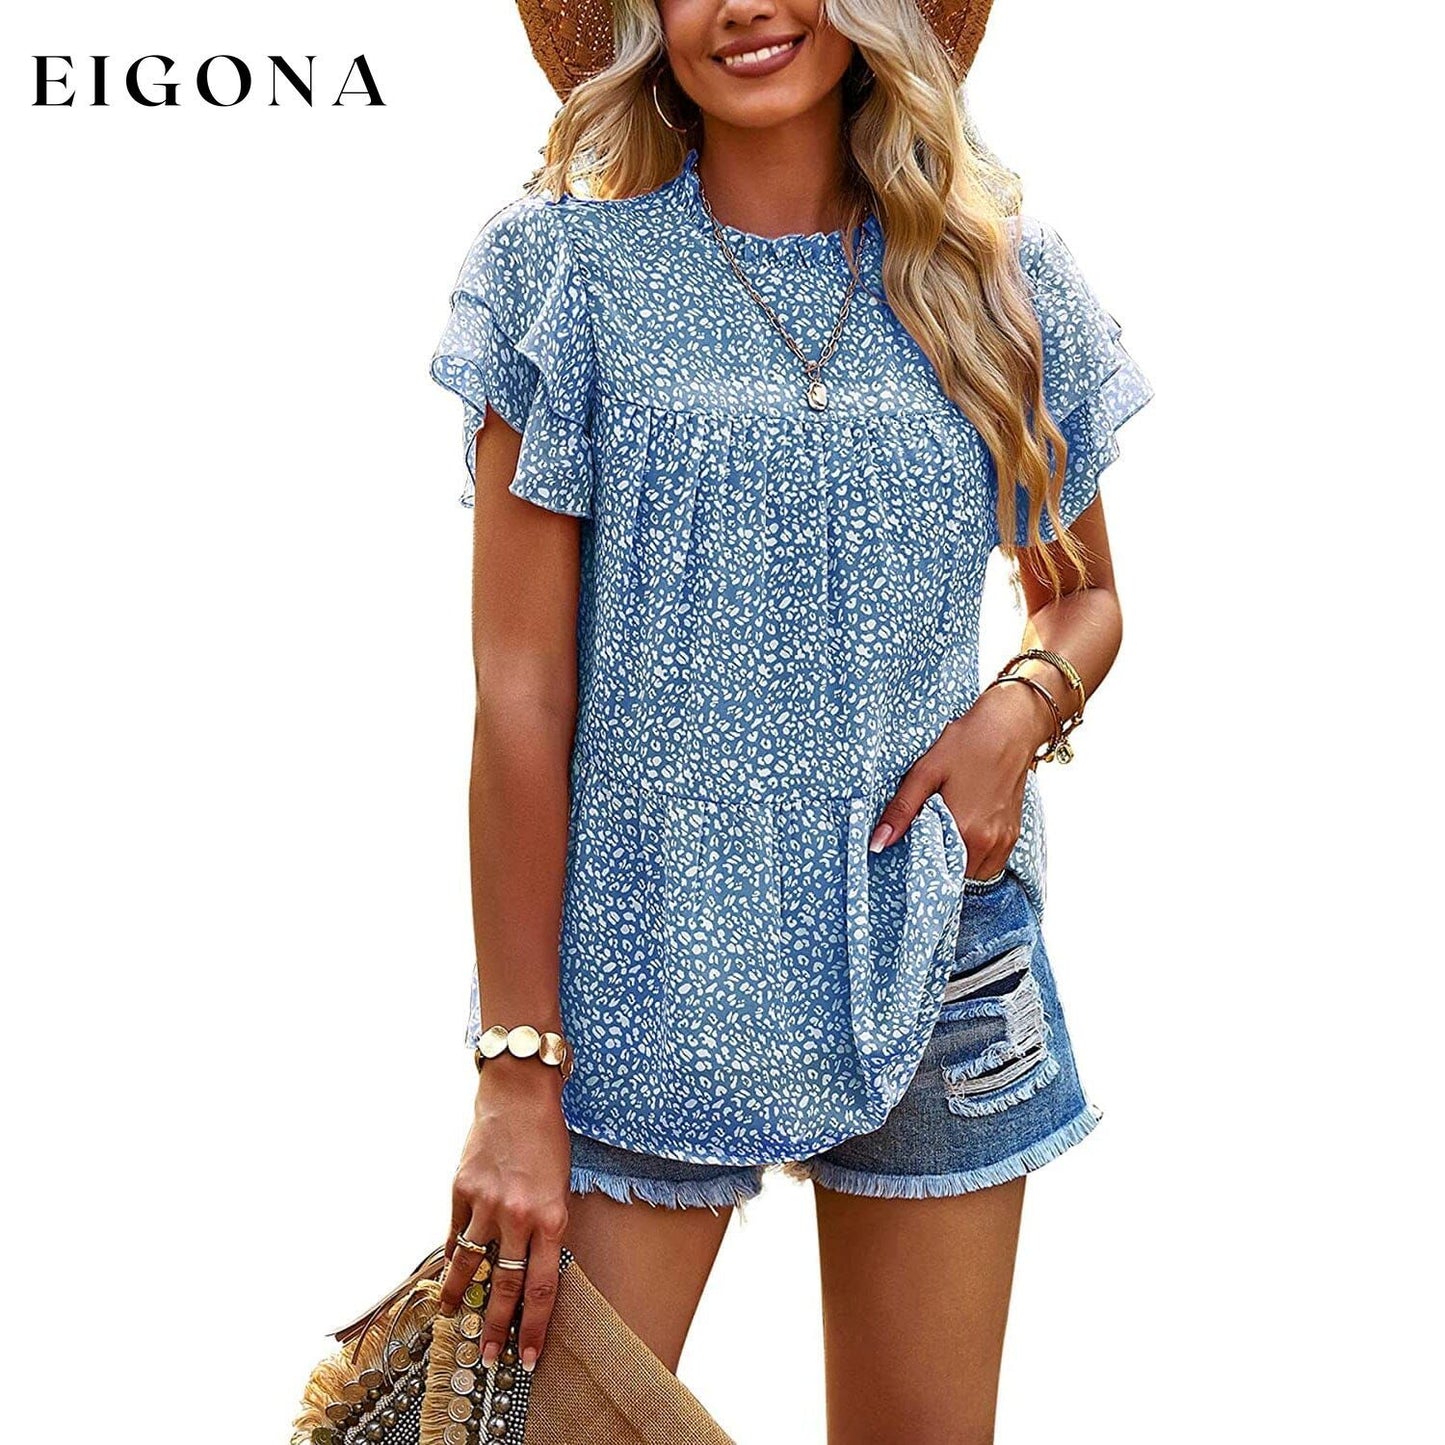 Women's Casual Summer Tops Ruffle Short Sleeve Mock Neck Fashion Floral Chiffon Blouse Shirts Blue __stock:200 clothes refund_fee:1200 tops